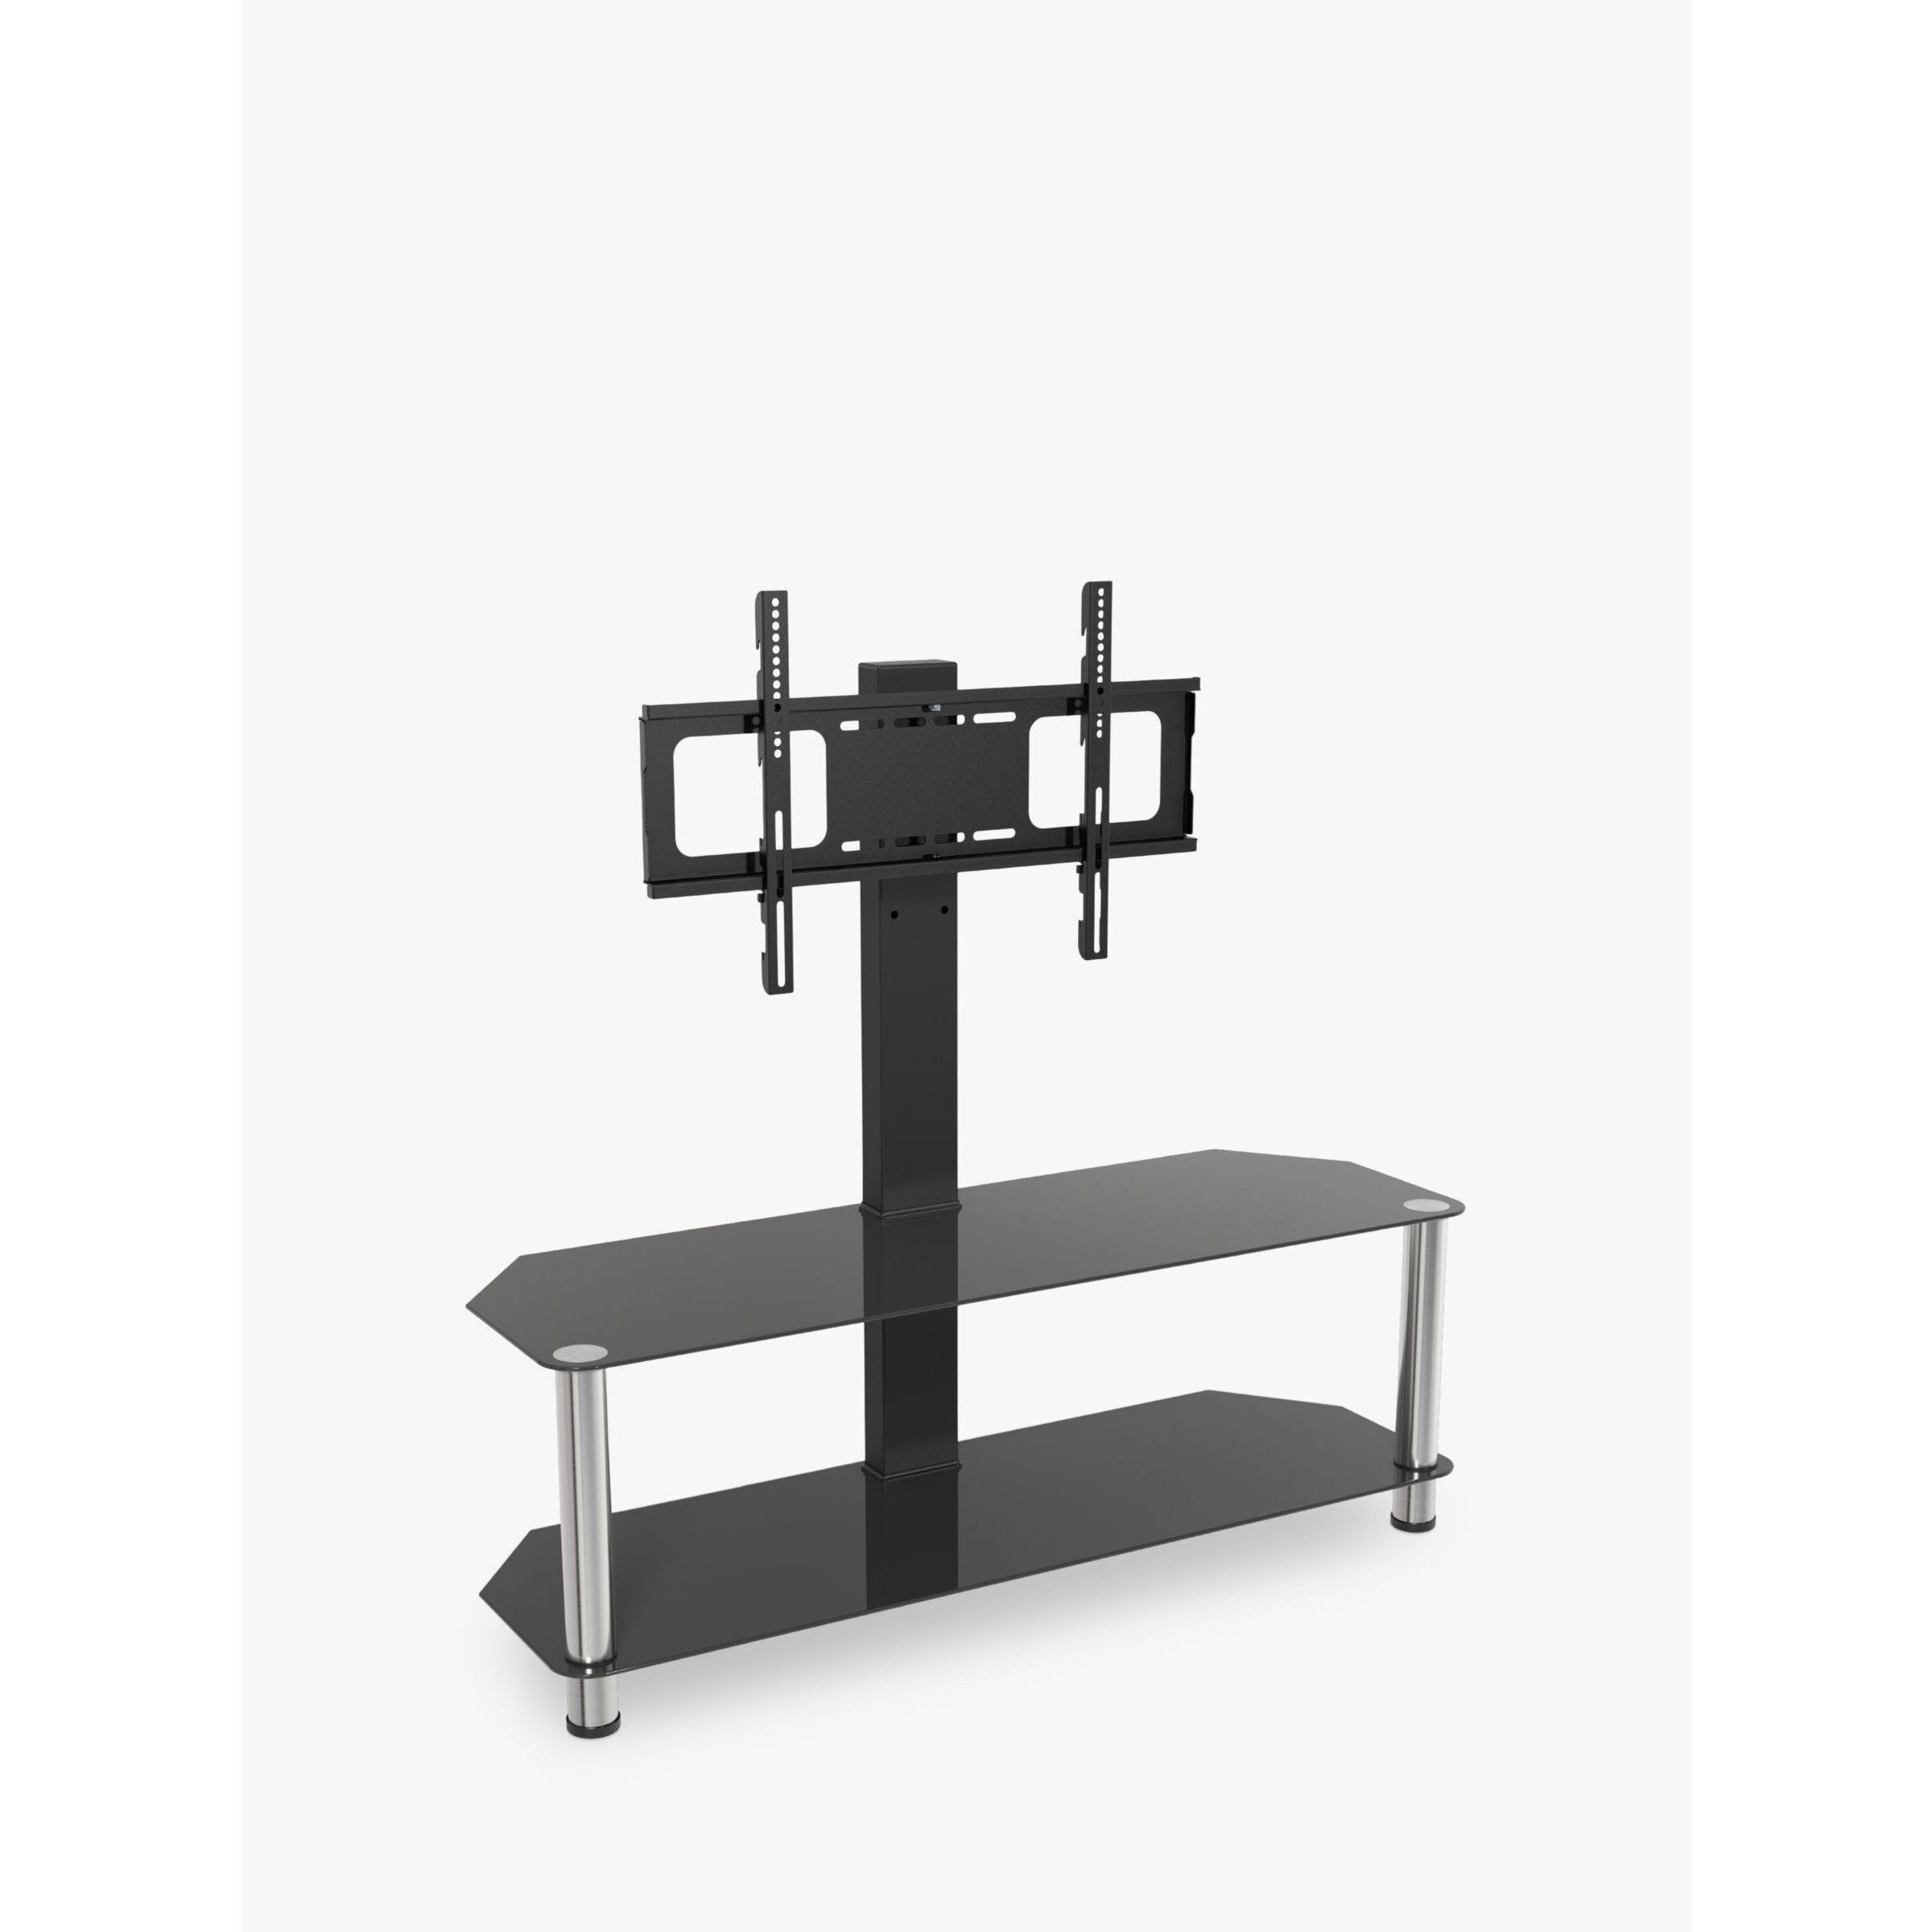 AVF SDCL1140 Corner TV Stand with Mount for TVs up to 65”, Black/Chrome - image 1